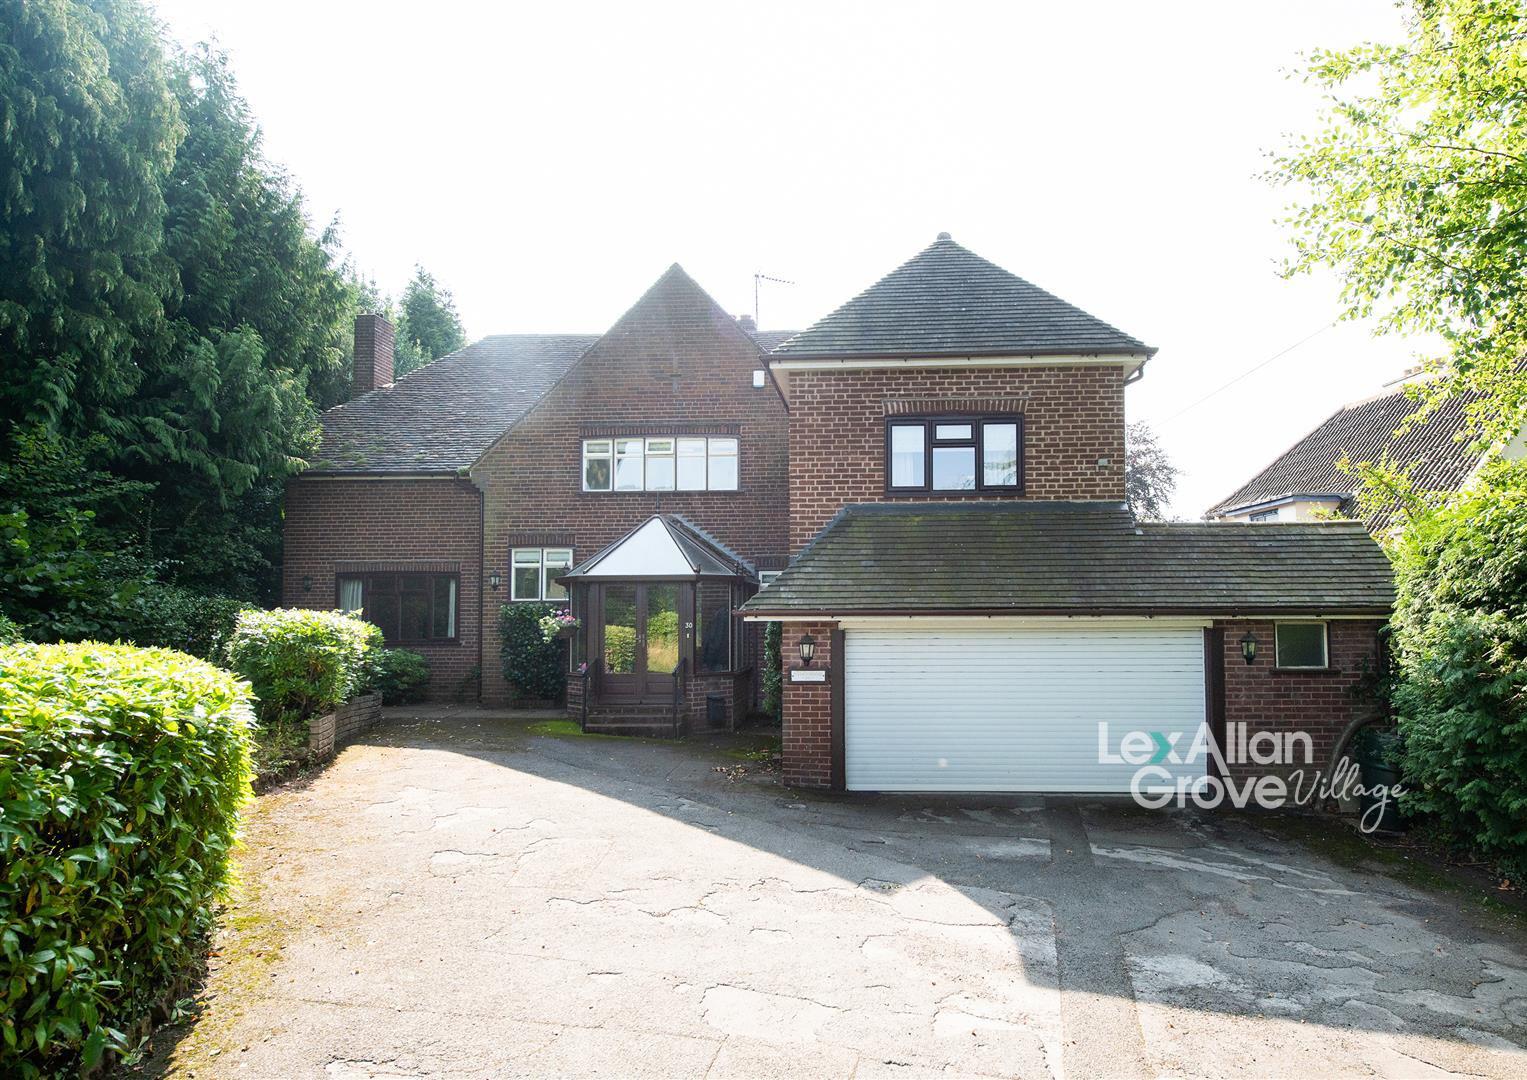 5 bed detached house for sale in Middlefield Lane, Hagley - Property Image 1